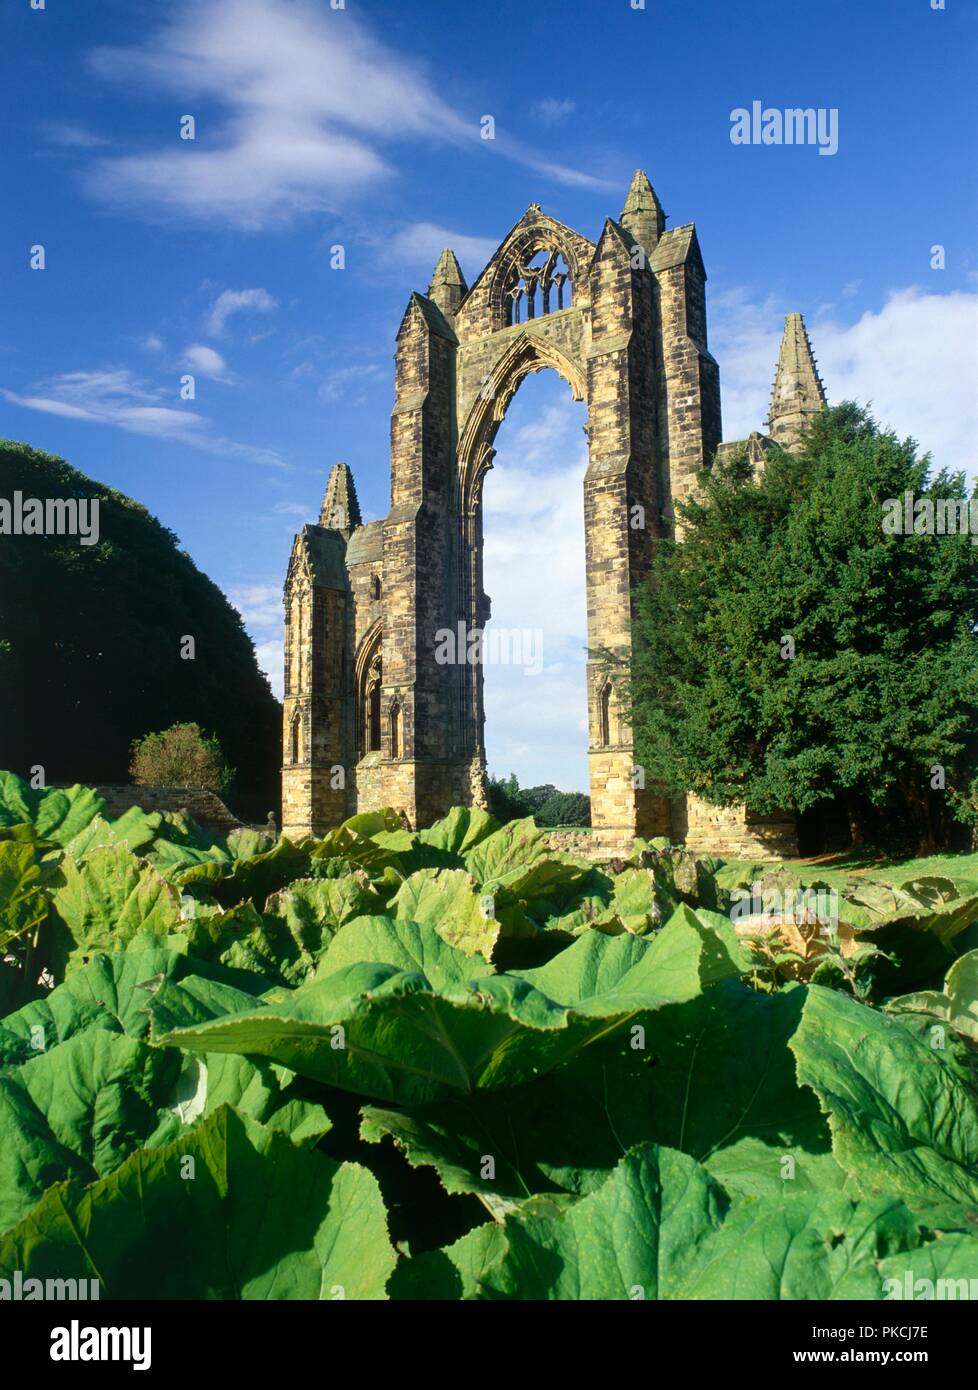 Gisborough Priory, Redcar and Cleveland, 2010. Artist: Mike Kipling. Stock Photo